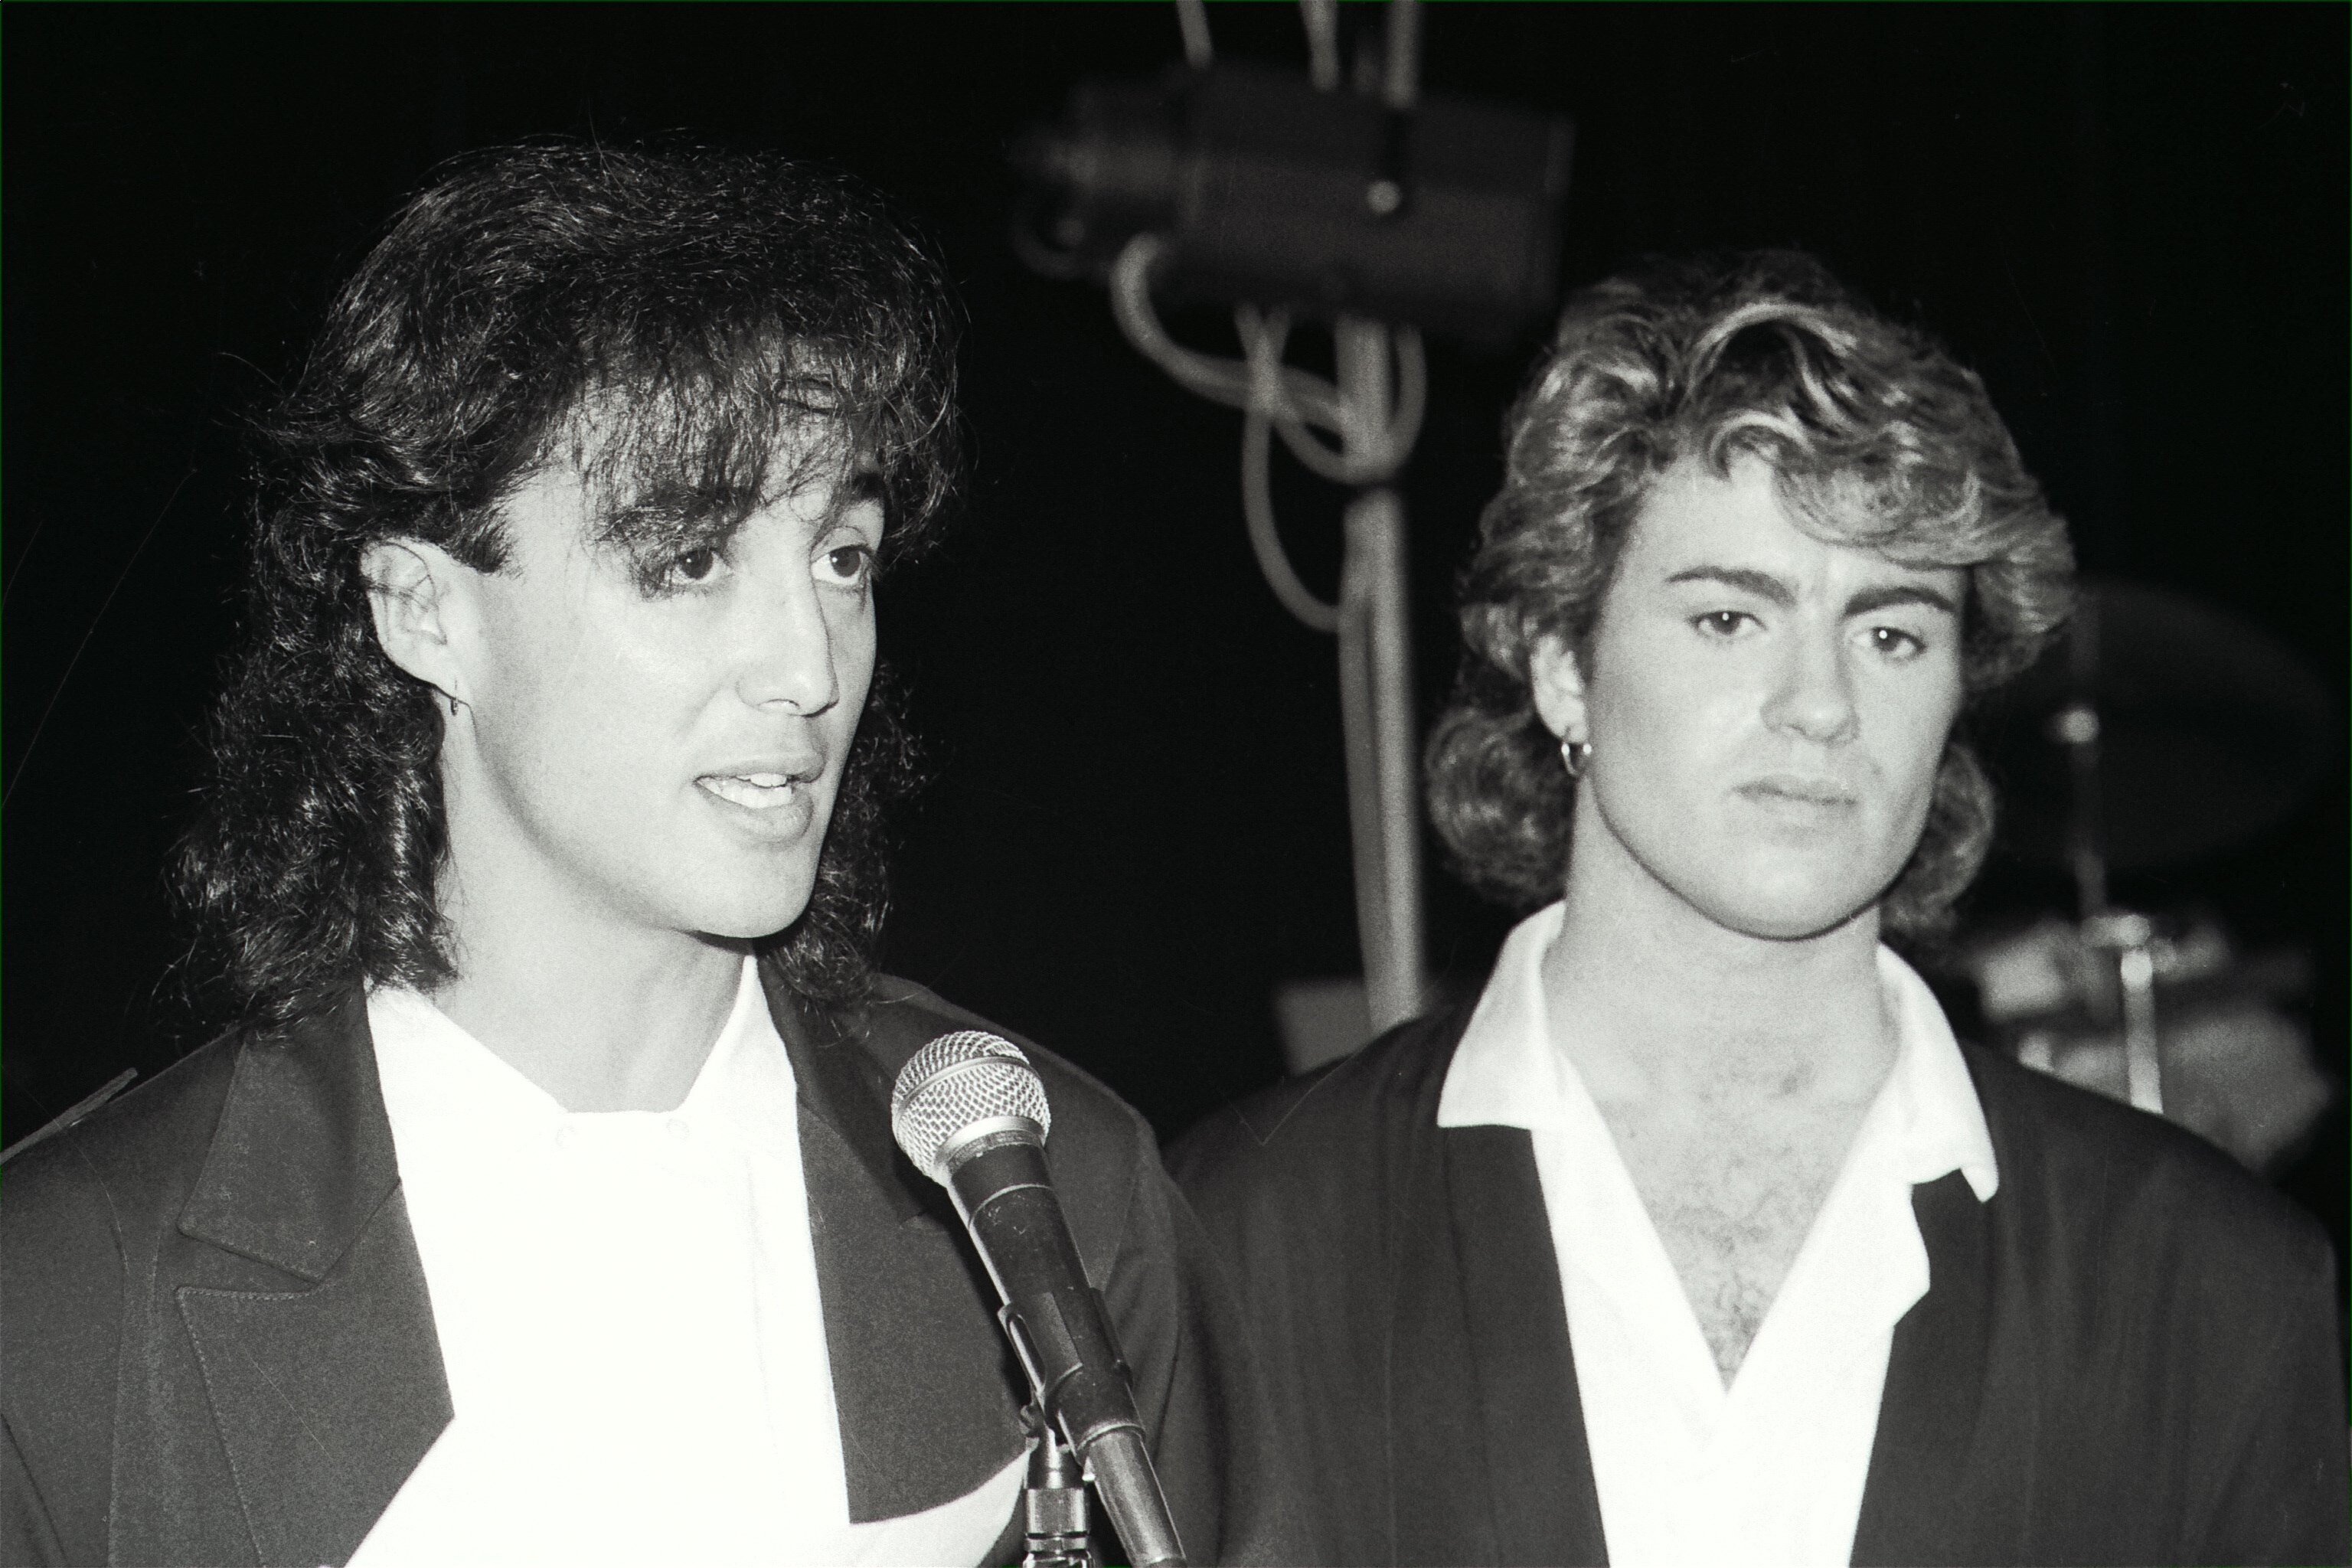 Not to be forgotten: Andrew Ridgeley and George Michael’s visit to China as British pop group Wham! in 1985 was groundbreaking at the time. Photo: SCMP Archives